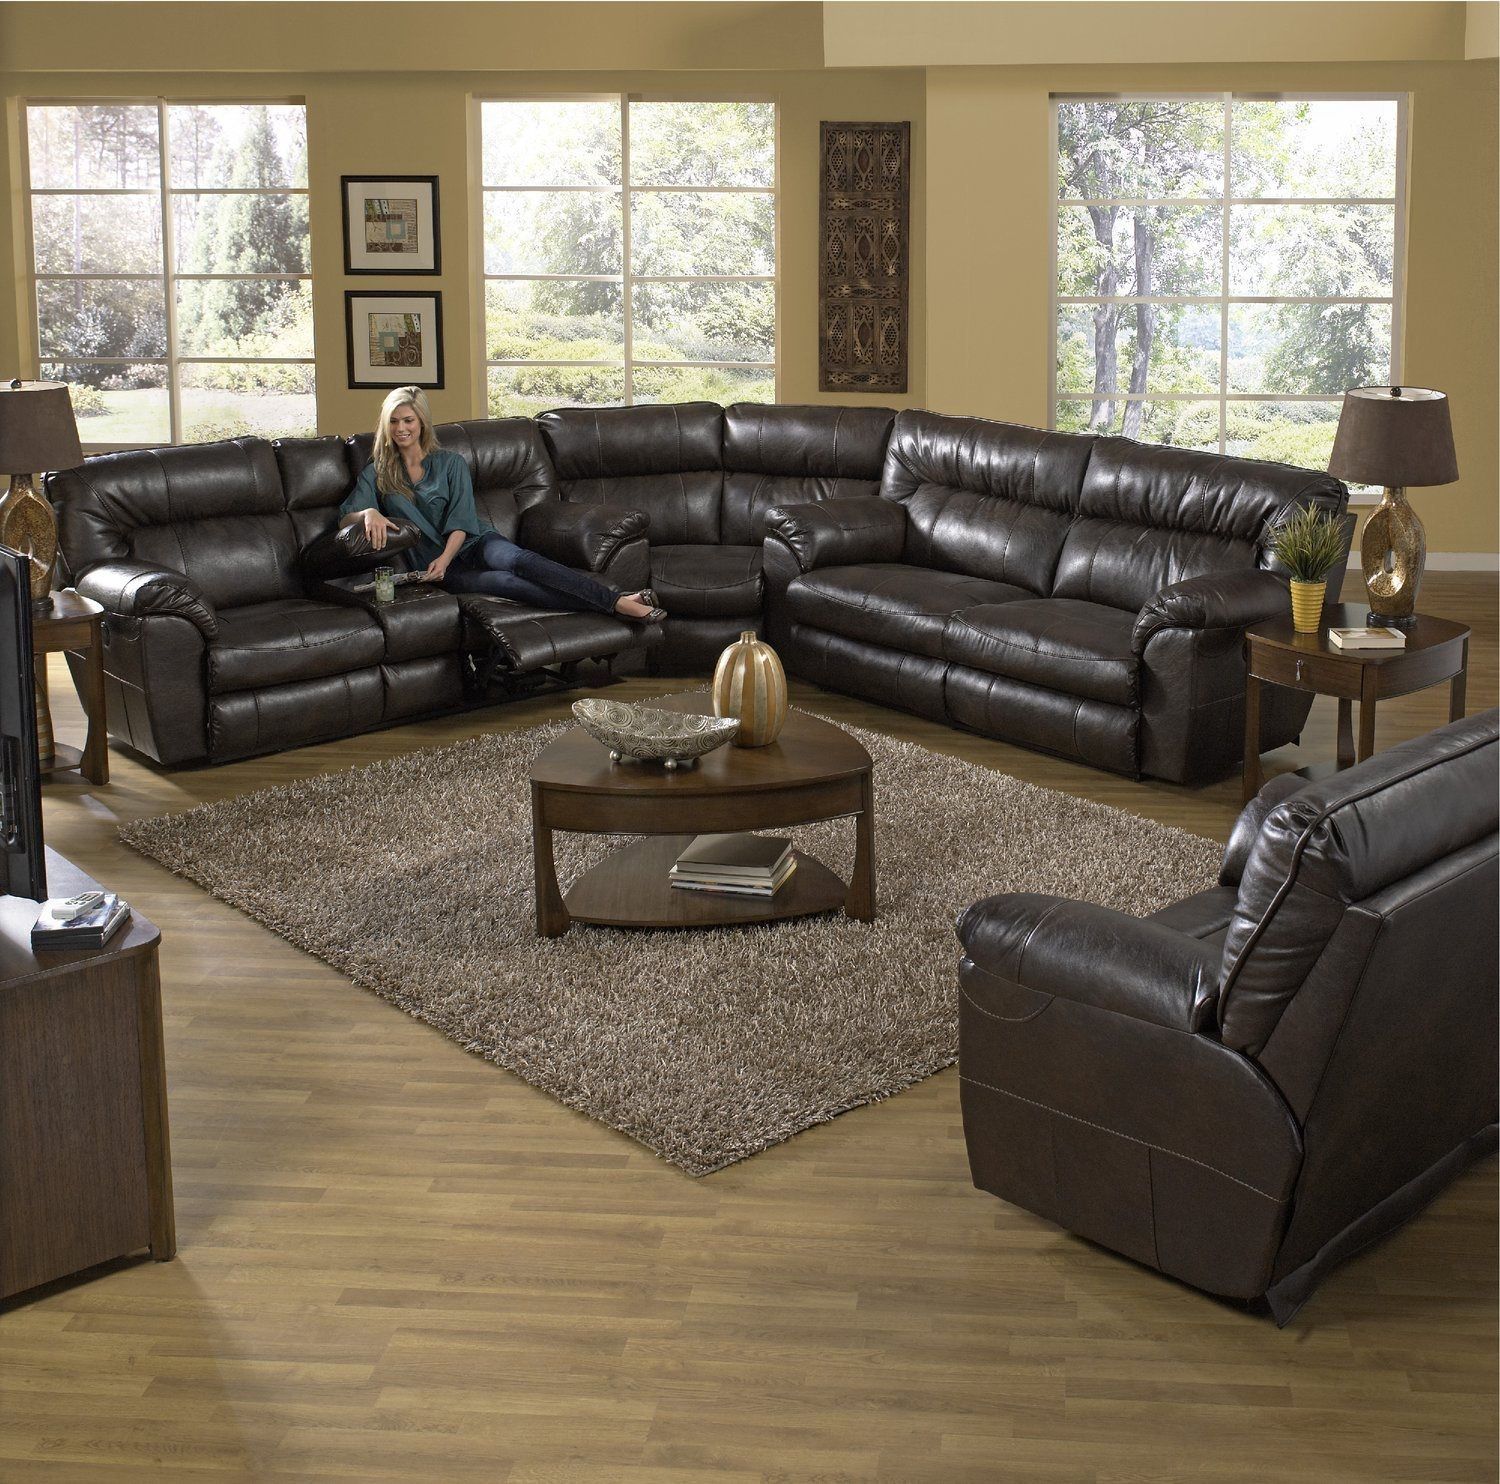 Featured Photo of The 10 Best Collection of Minneapolis Sectional Sofas